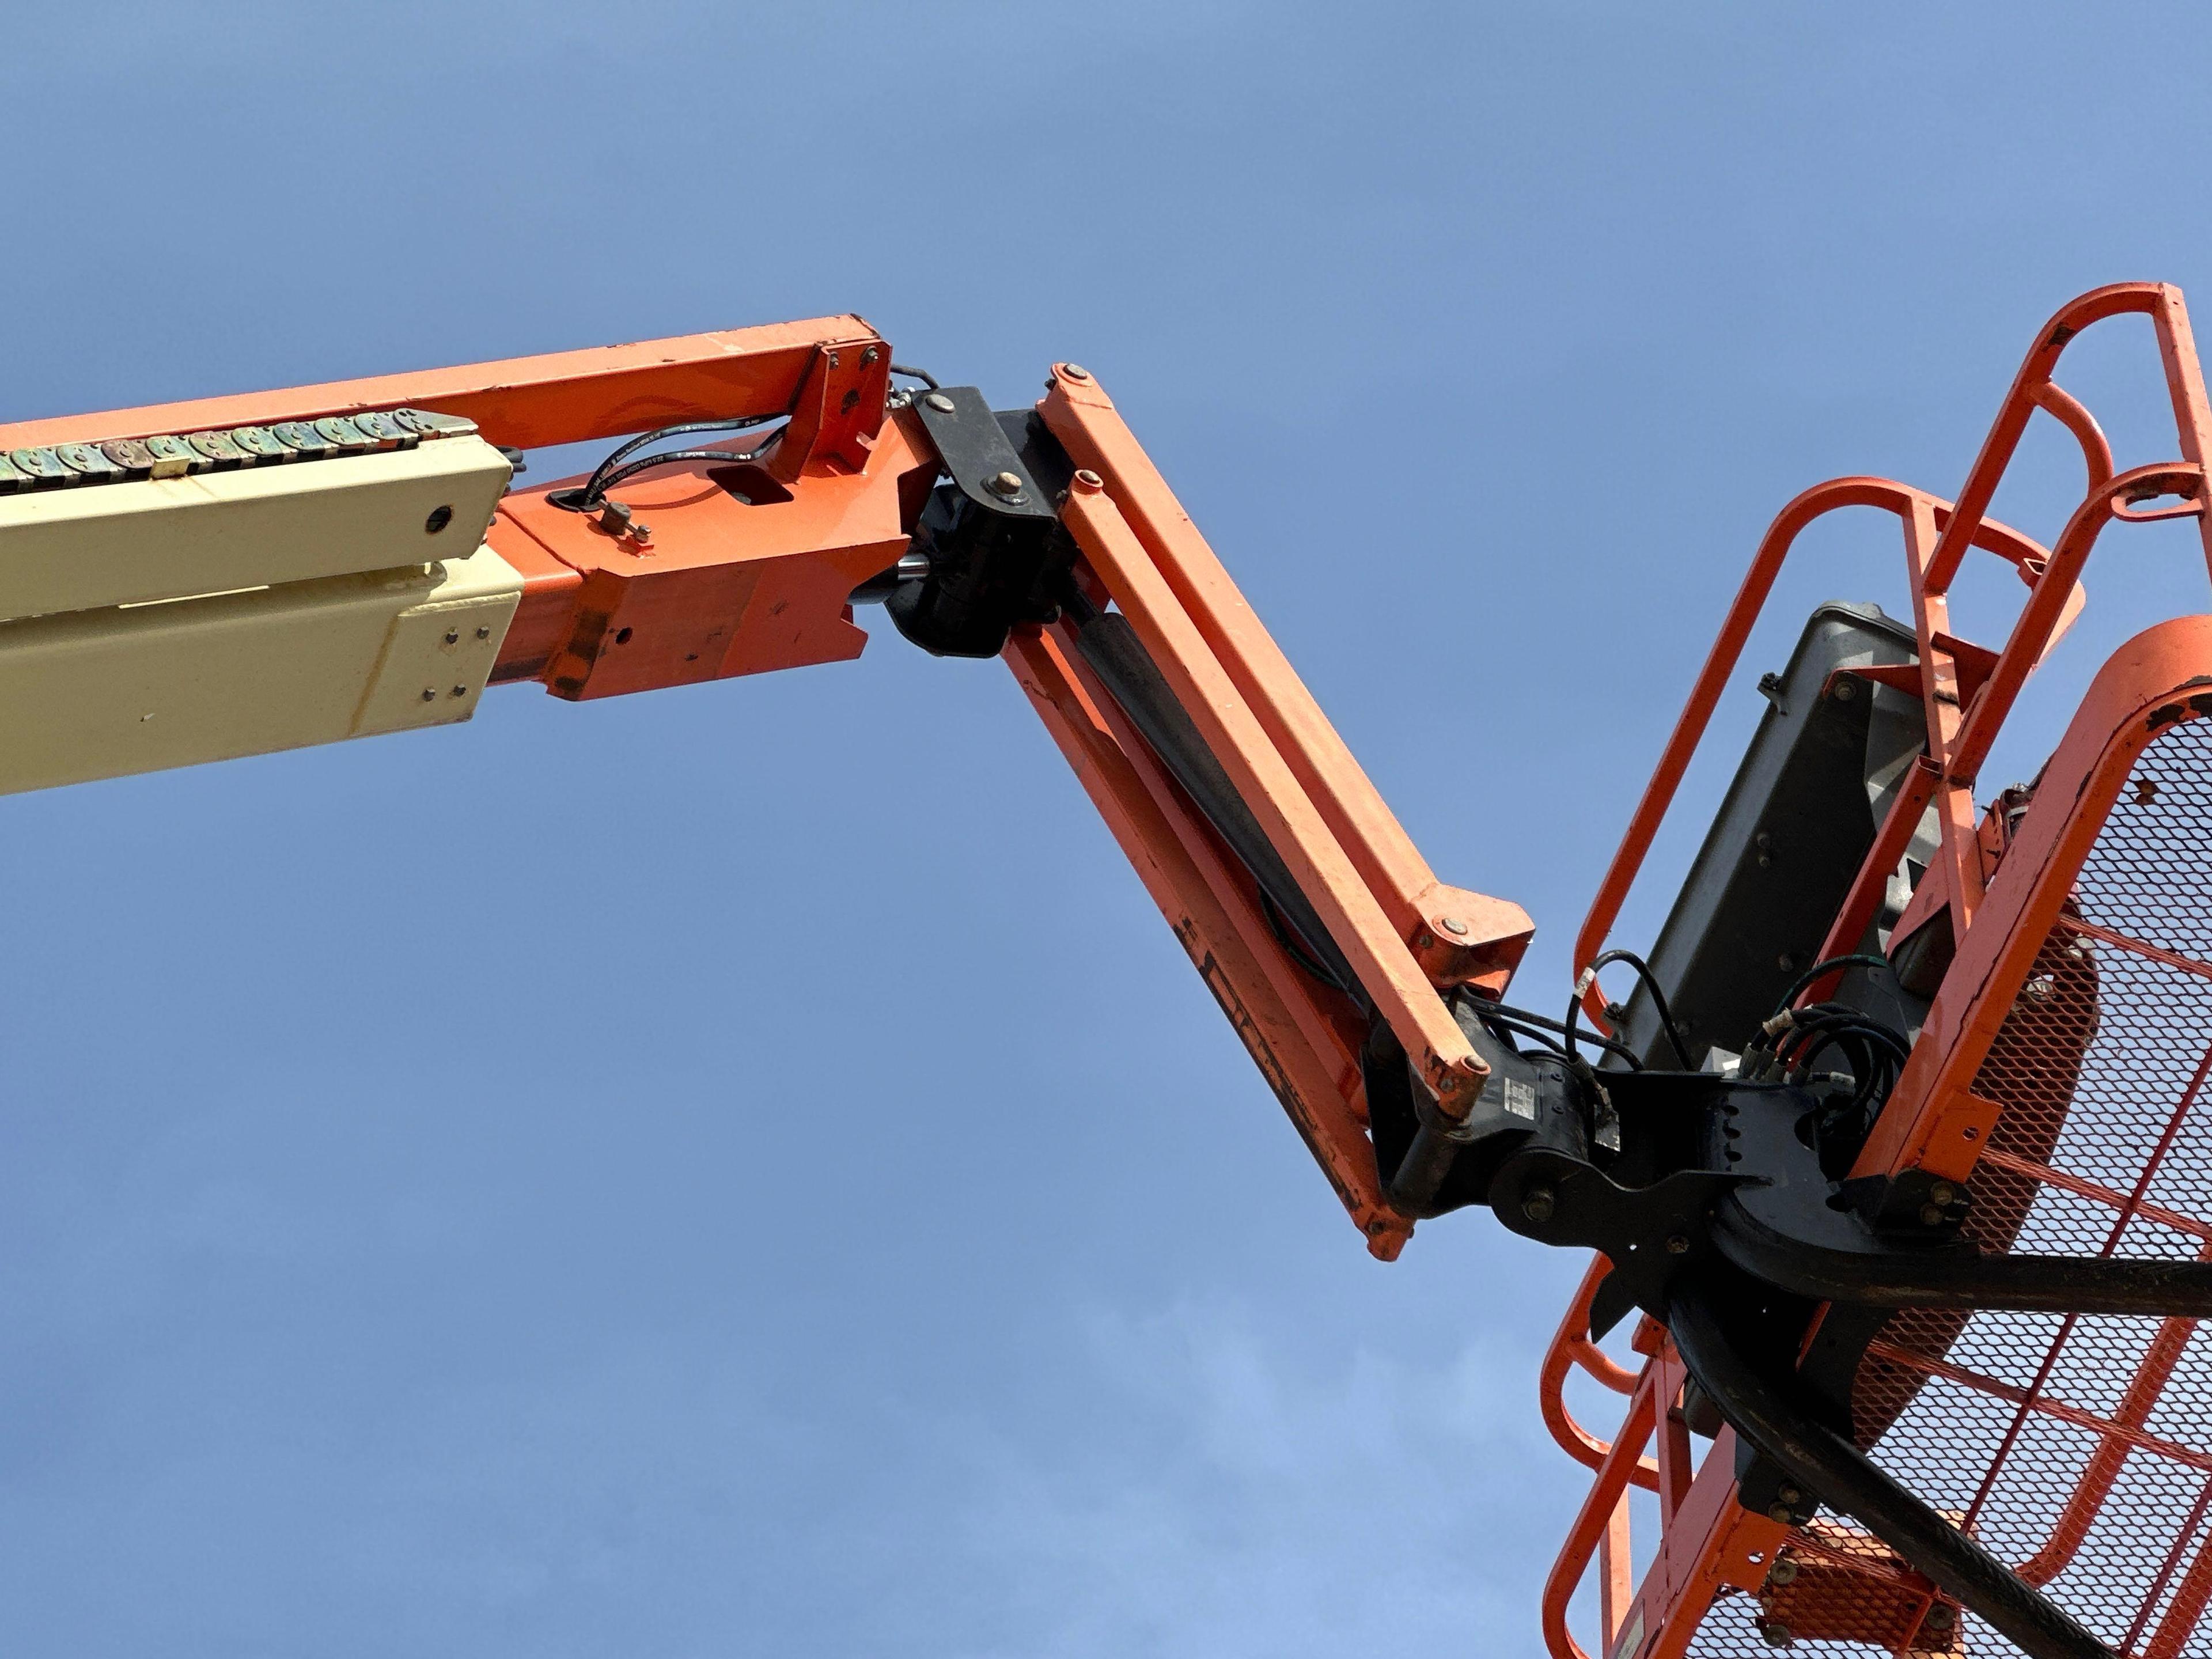 2013 JLG 450AJ BOOM LIFT SN:300173672 4x4, powered by diesel engine, equipped with 45ft. Platform